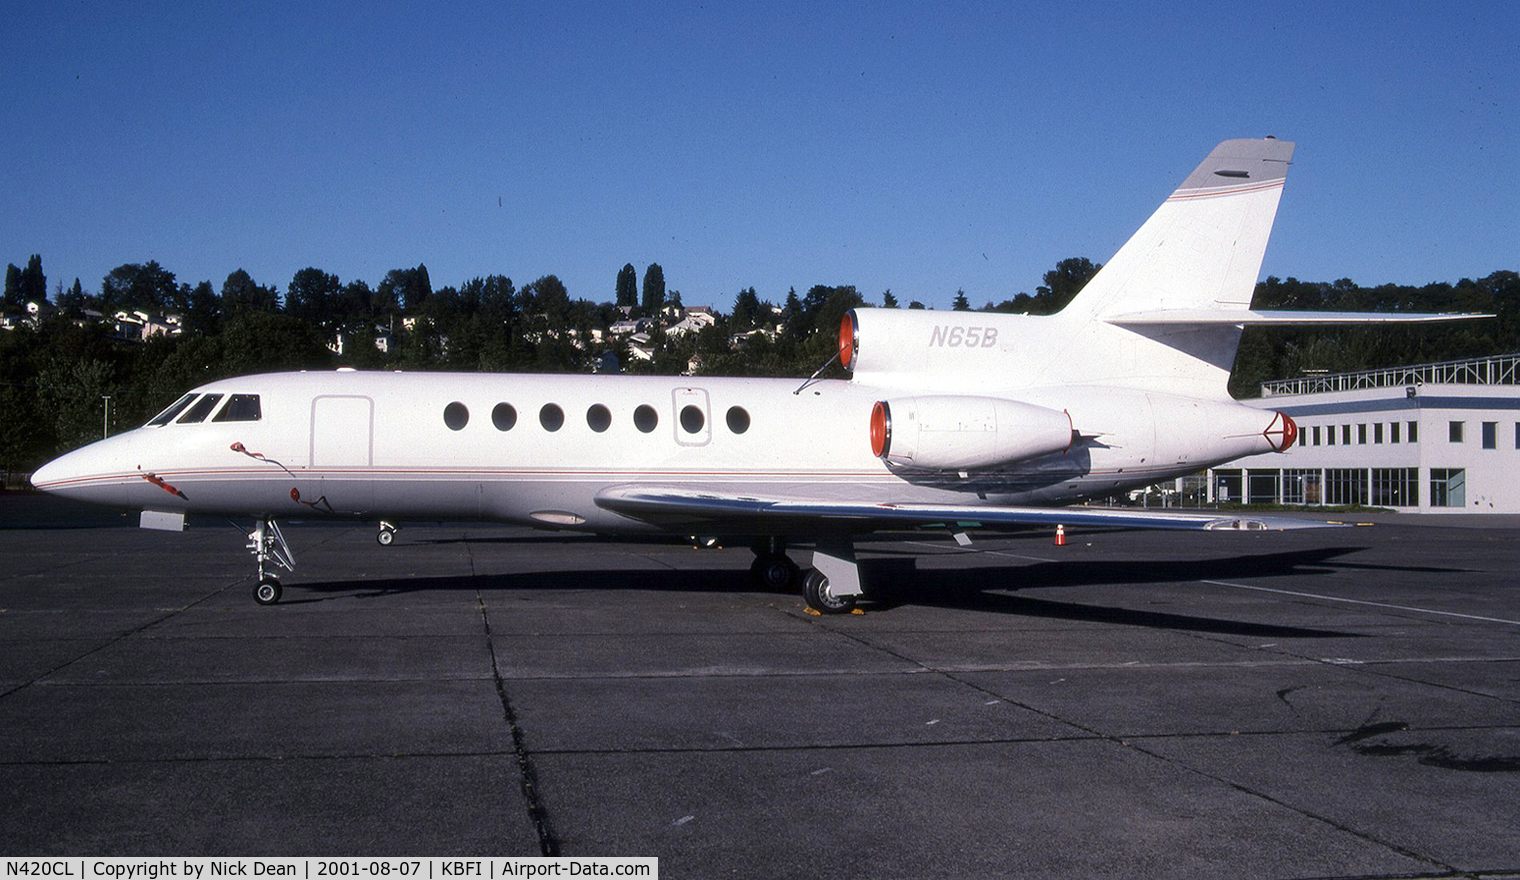 N420CL, 1979 Dassault-Breguet Falcon 50 C/N 10, KBFI (Seen here as N65B and currently registered N420CL as posted)